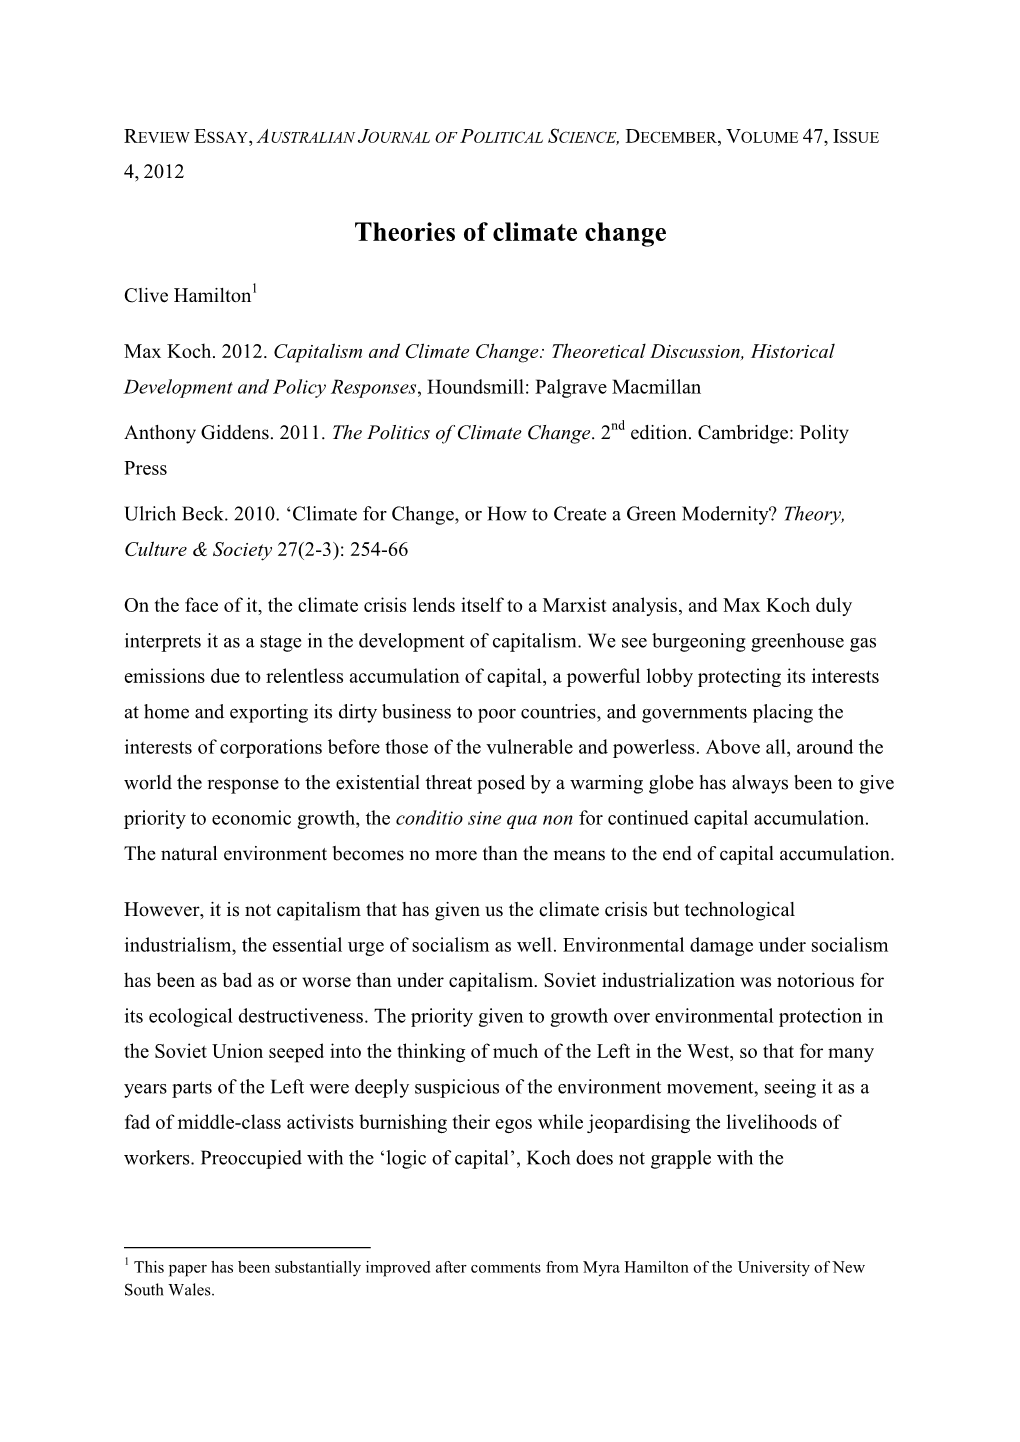 Theories of Climate Change